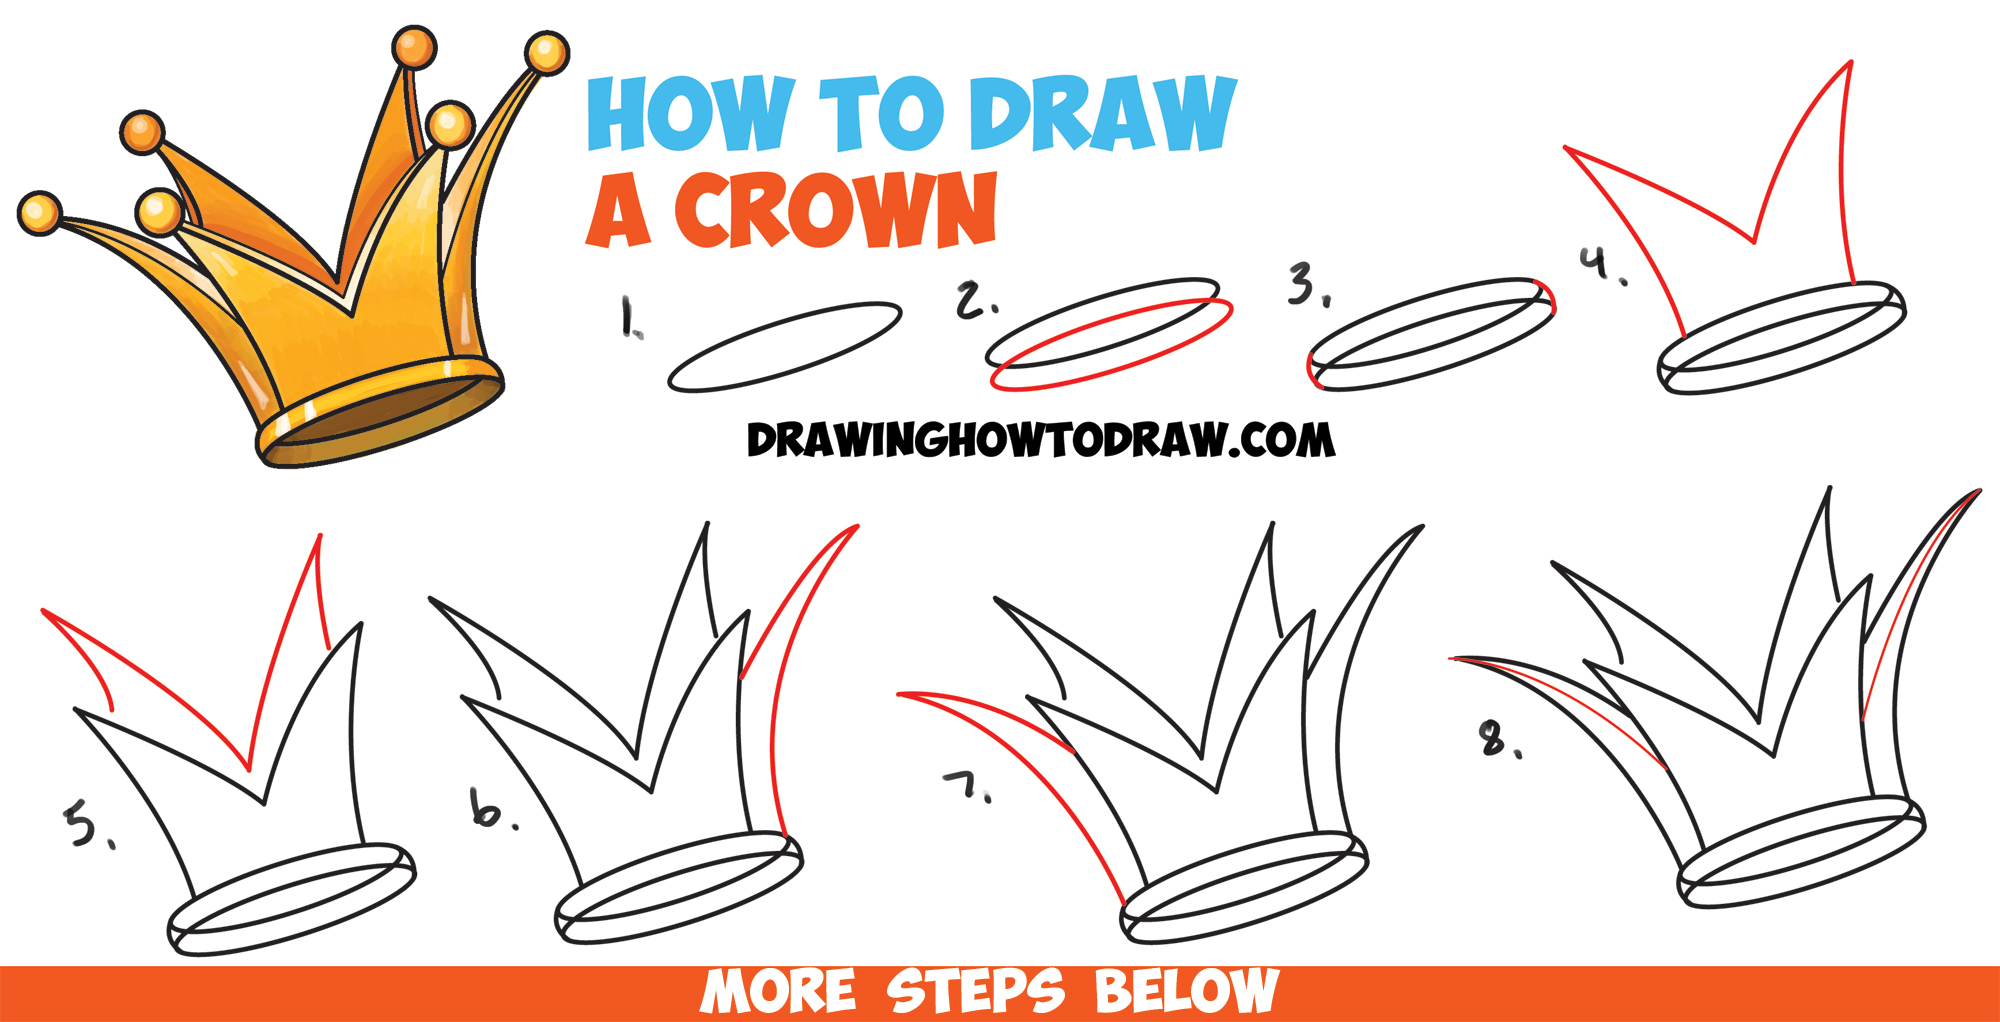 How To Draw A Crown Drawing Cartoon Crowns Easy Step By Step